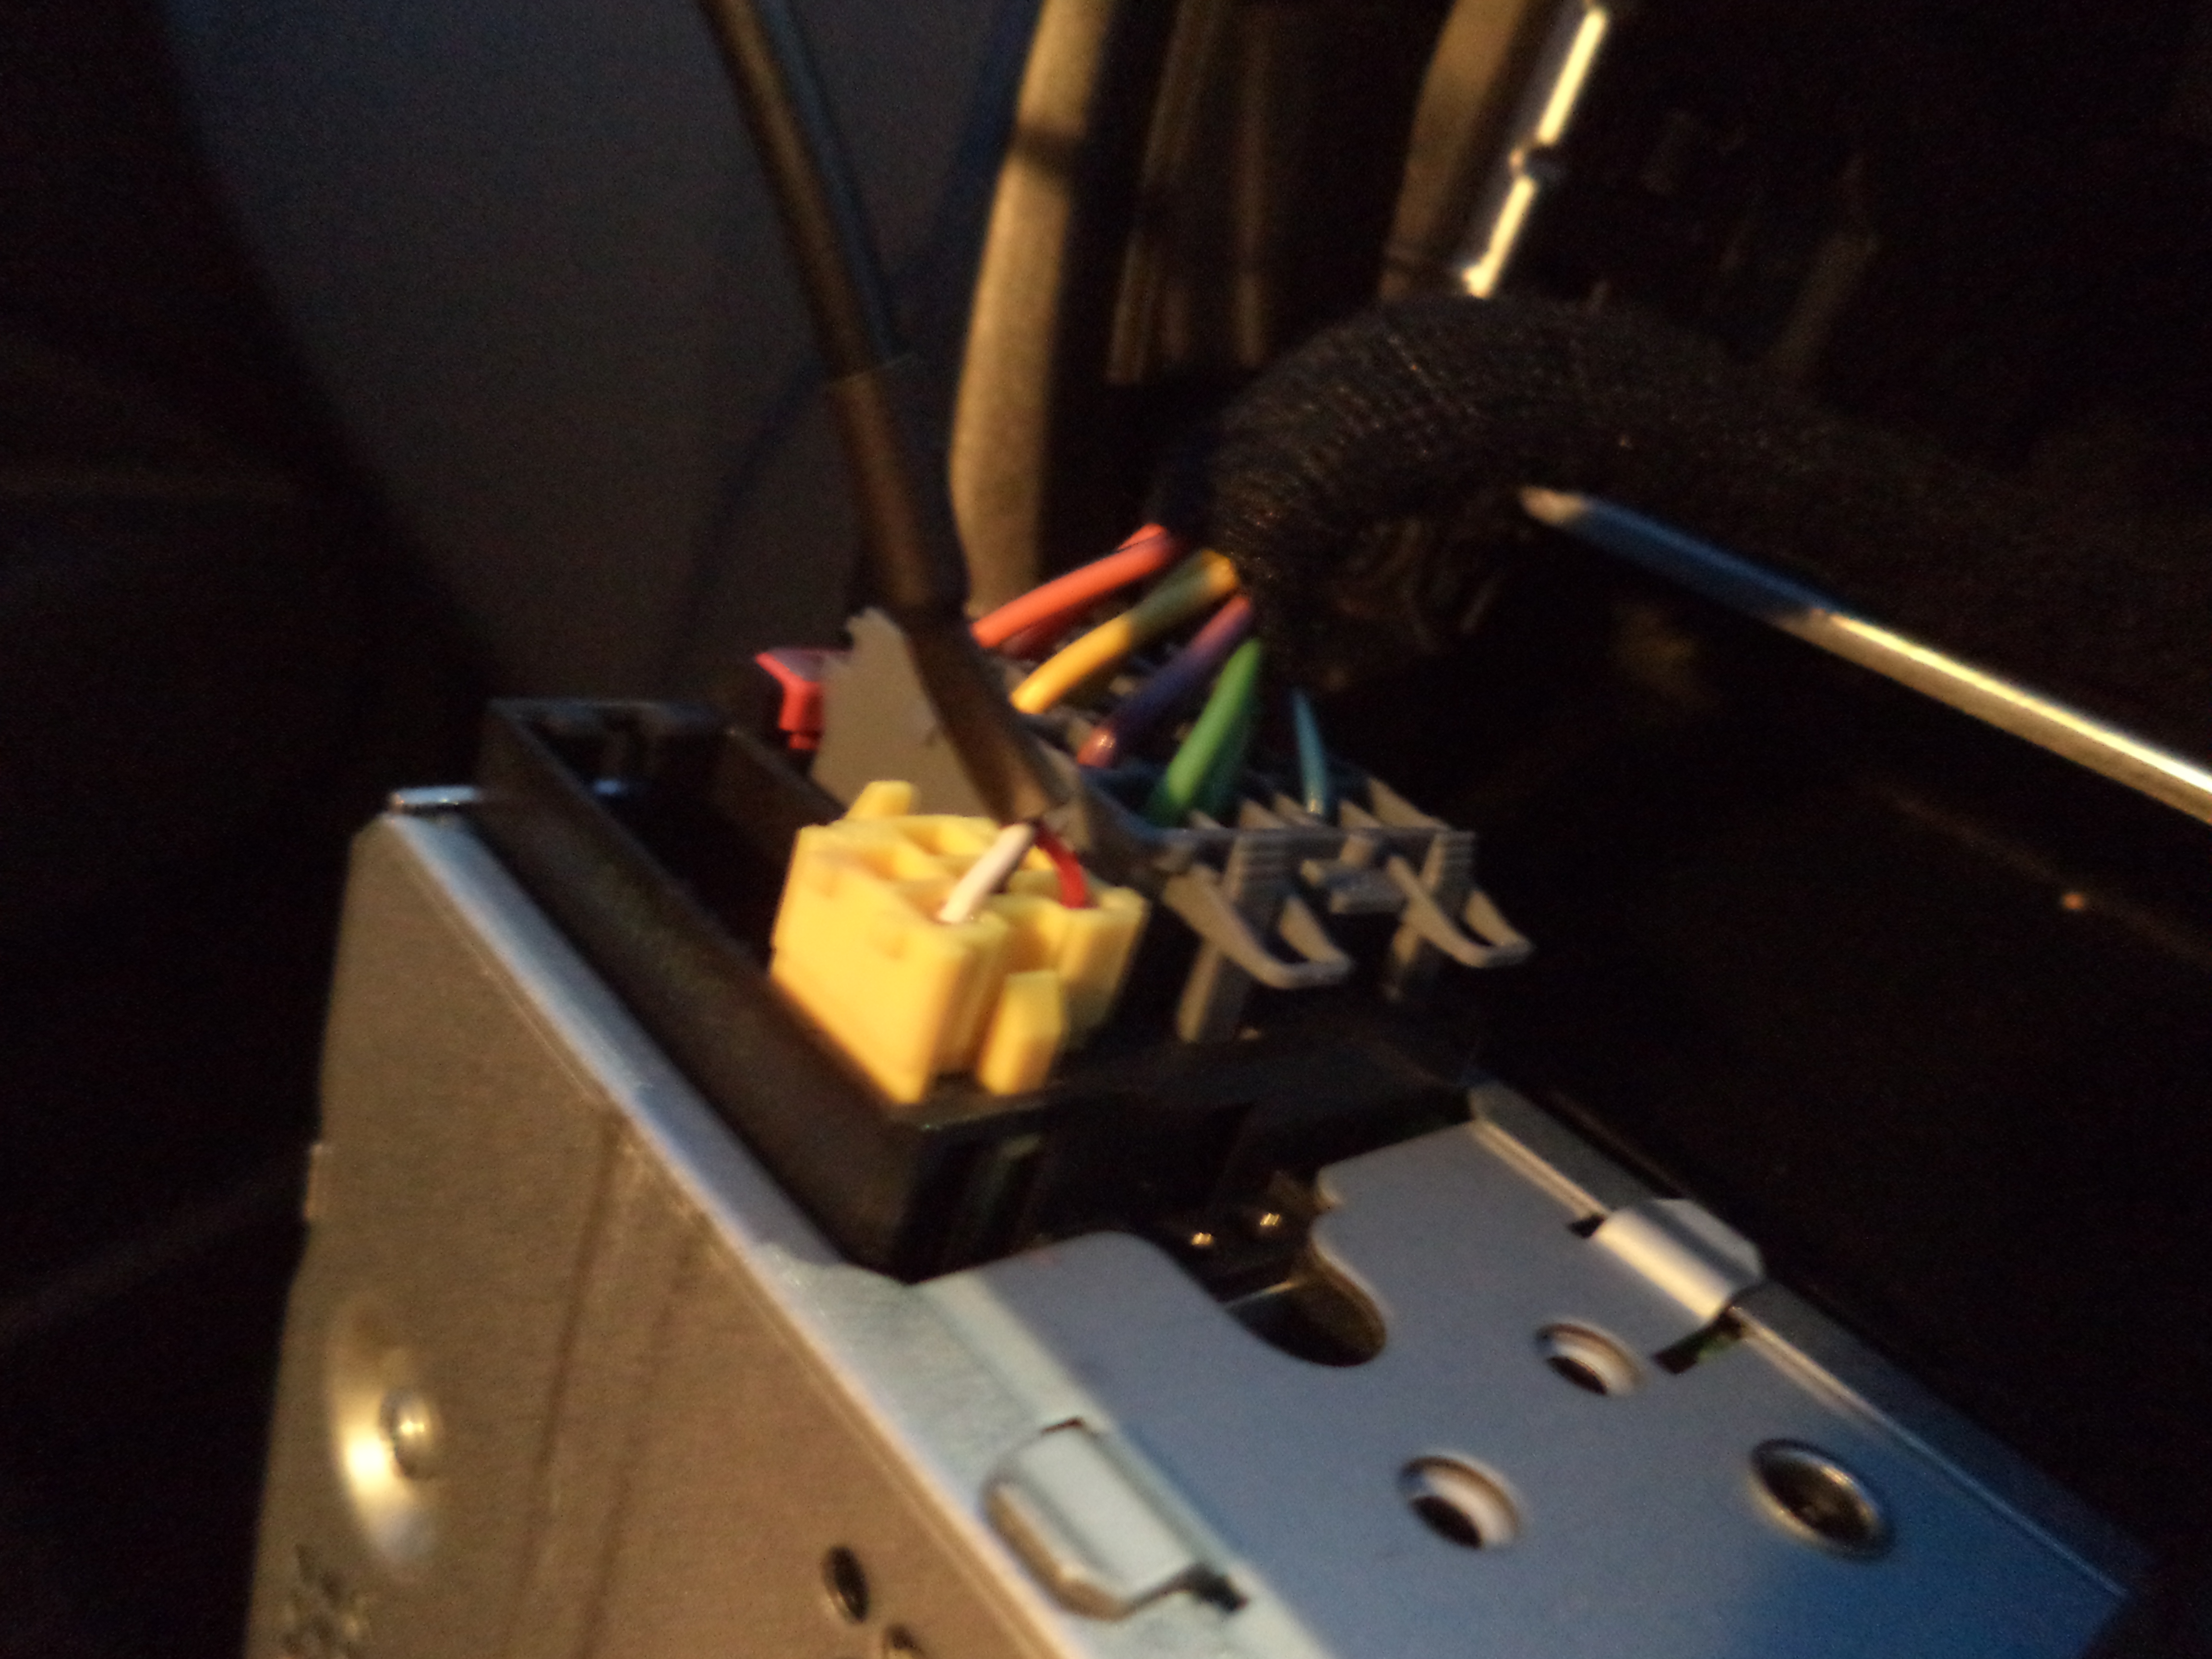 Aux connection Doblo Stereo (yellow Block)